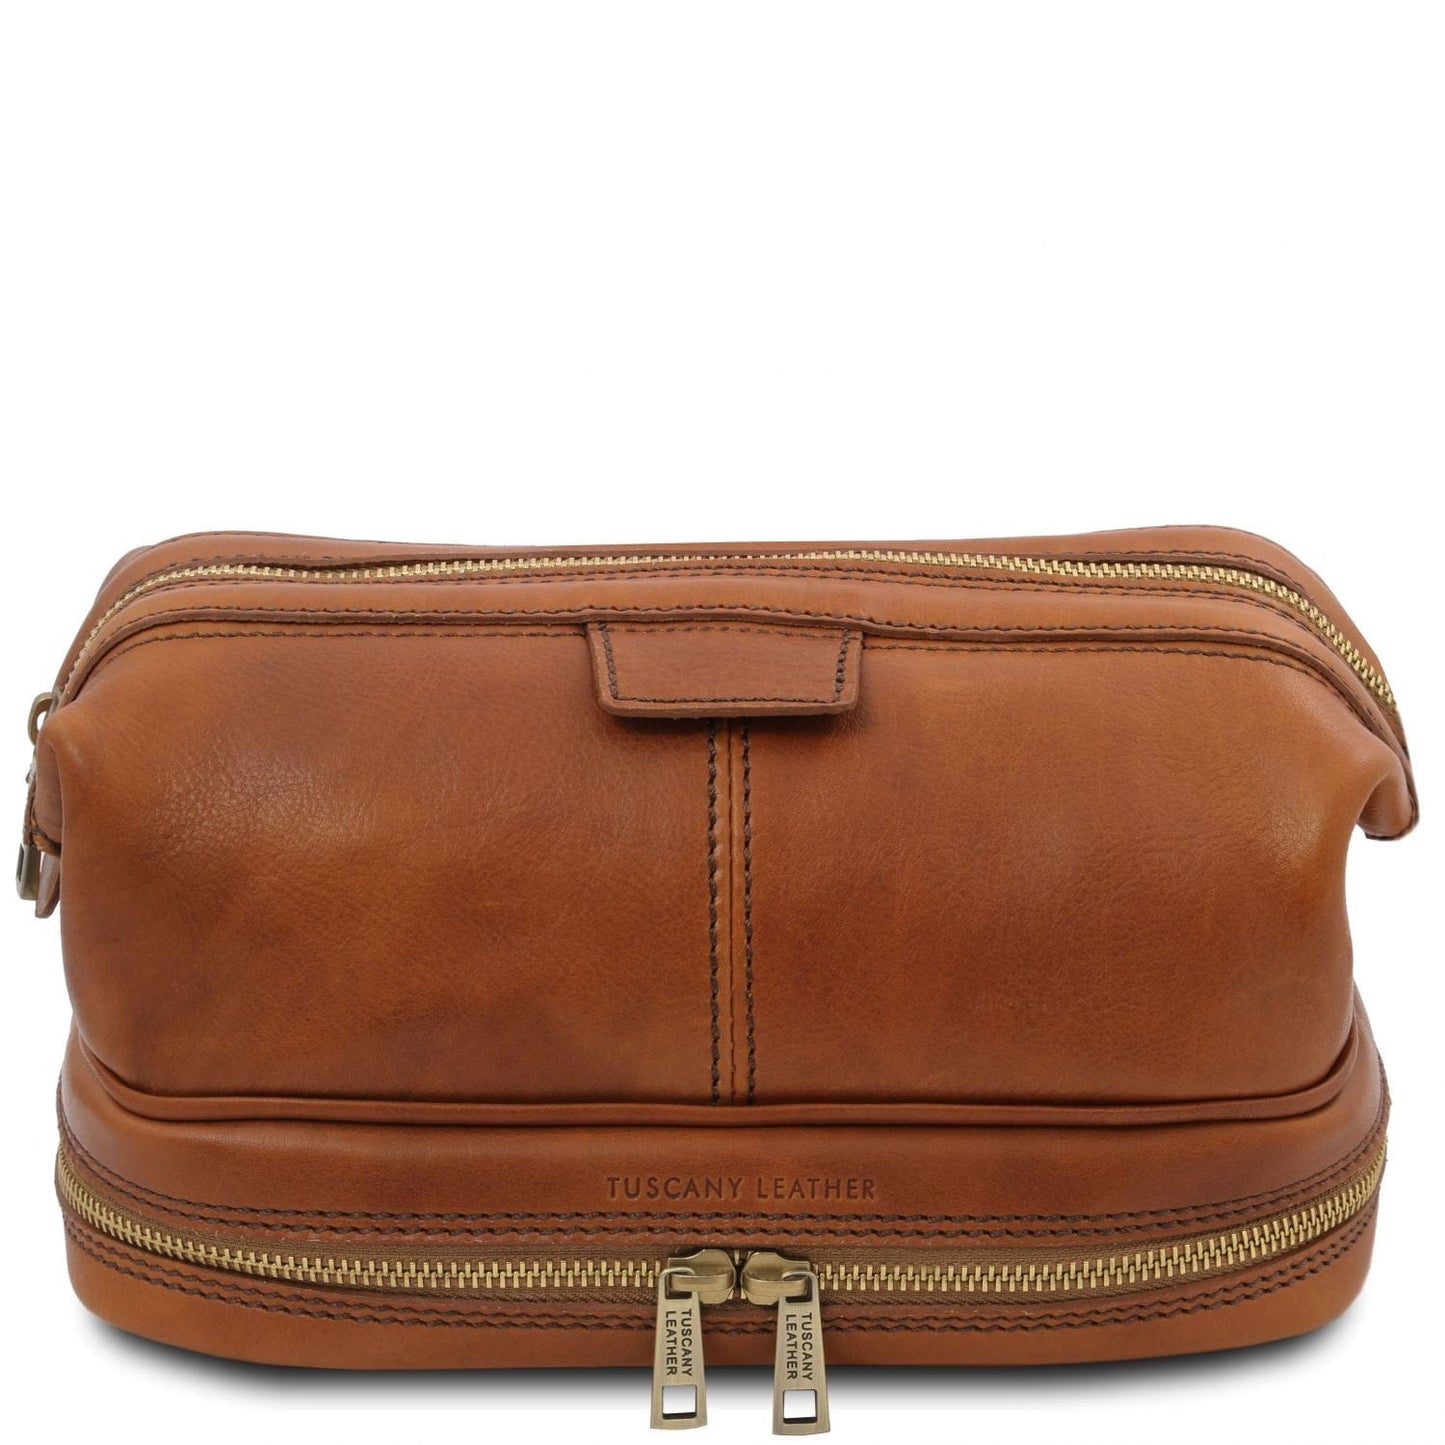 Patrick - Leather toiletry bag | TL141717 - Premium Travel leather accessories - Shop now at San Rocco Italia